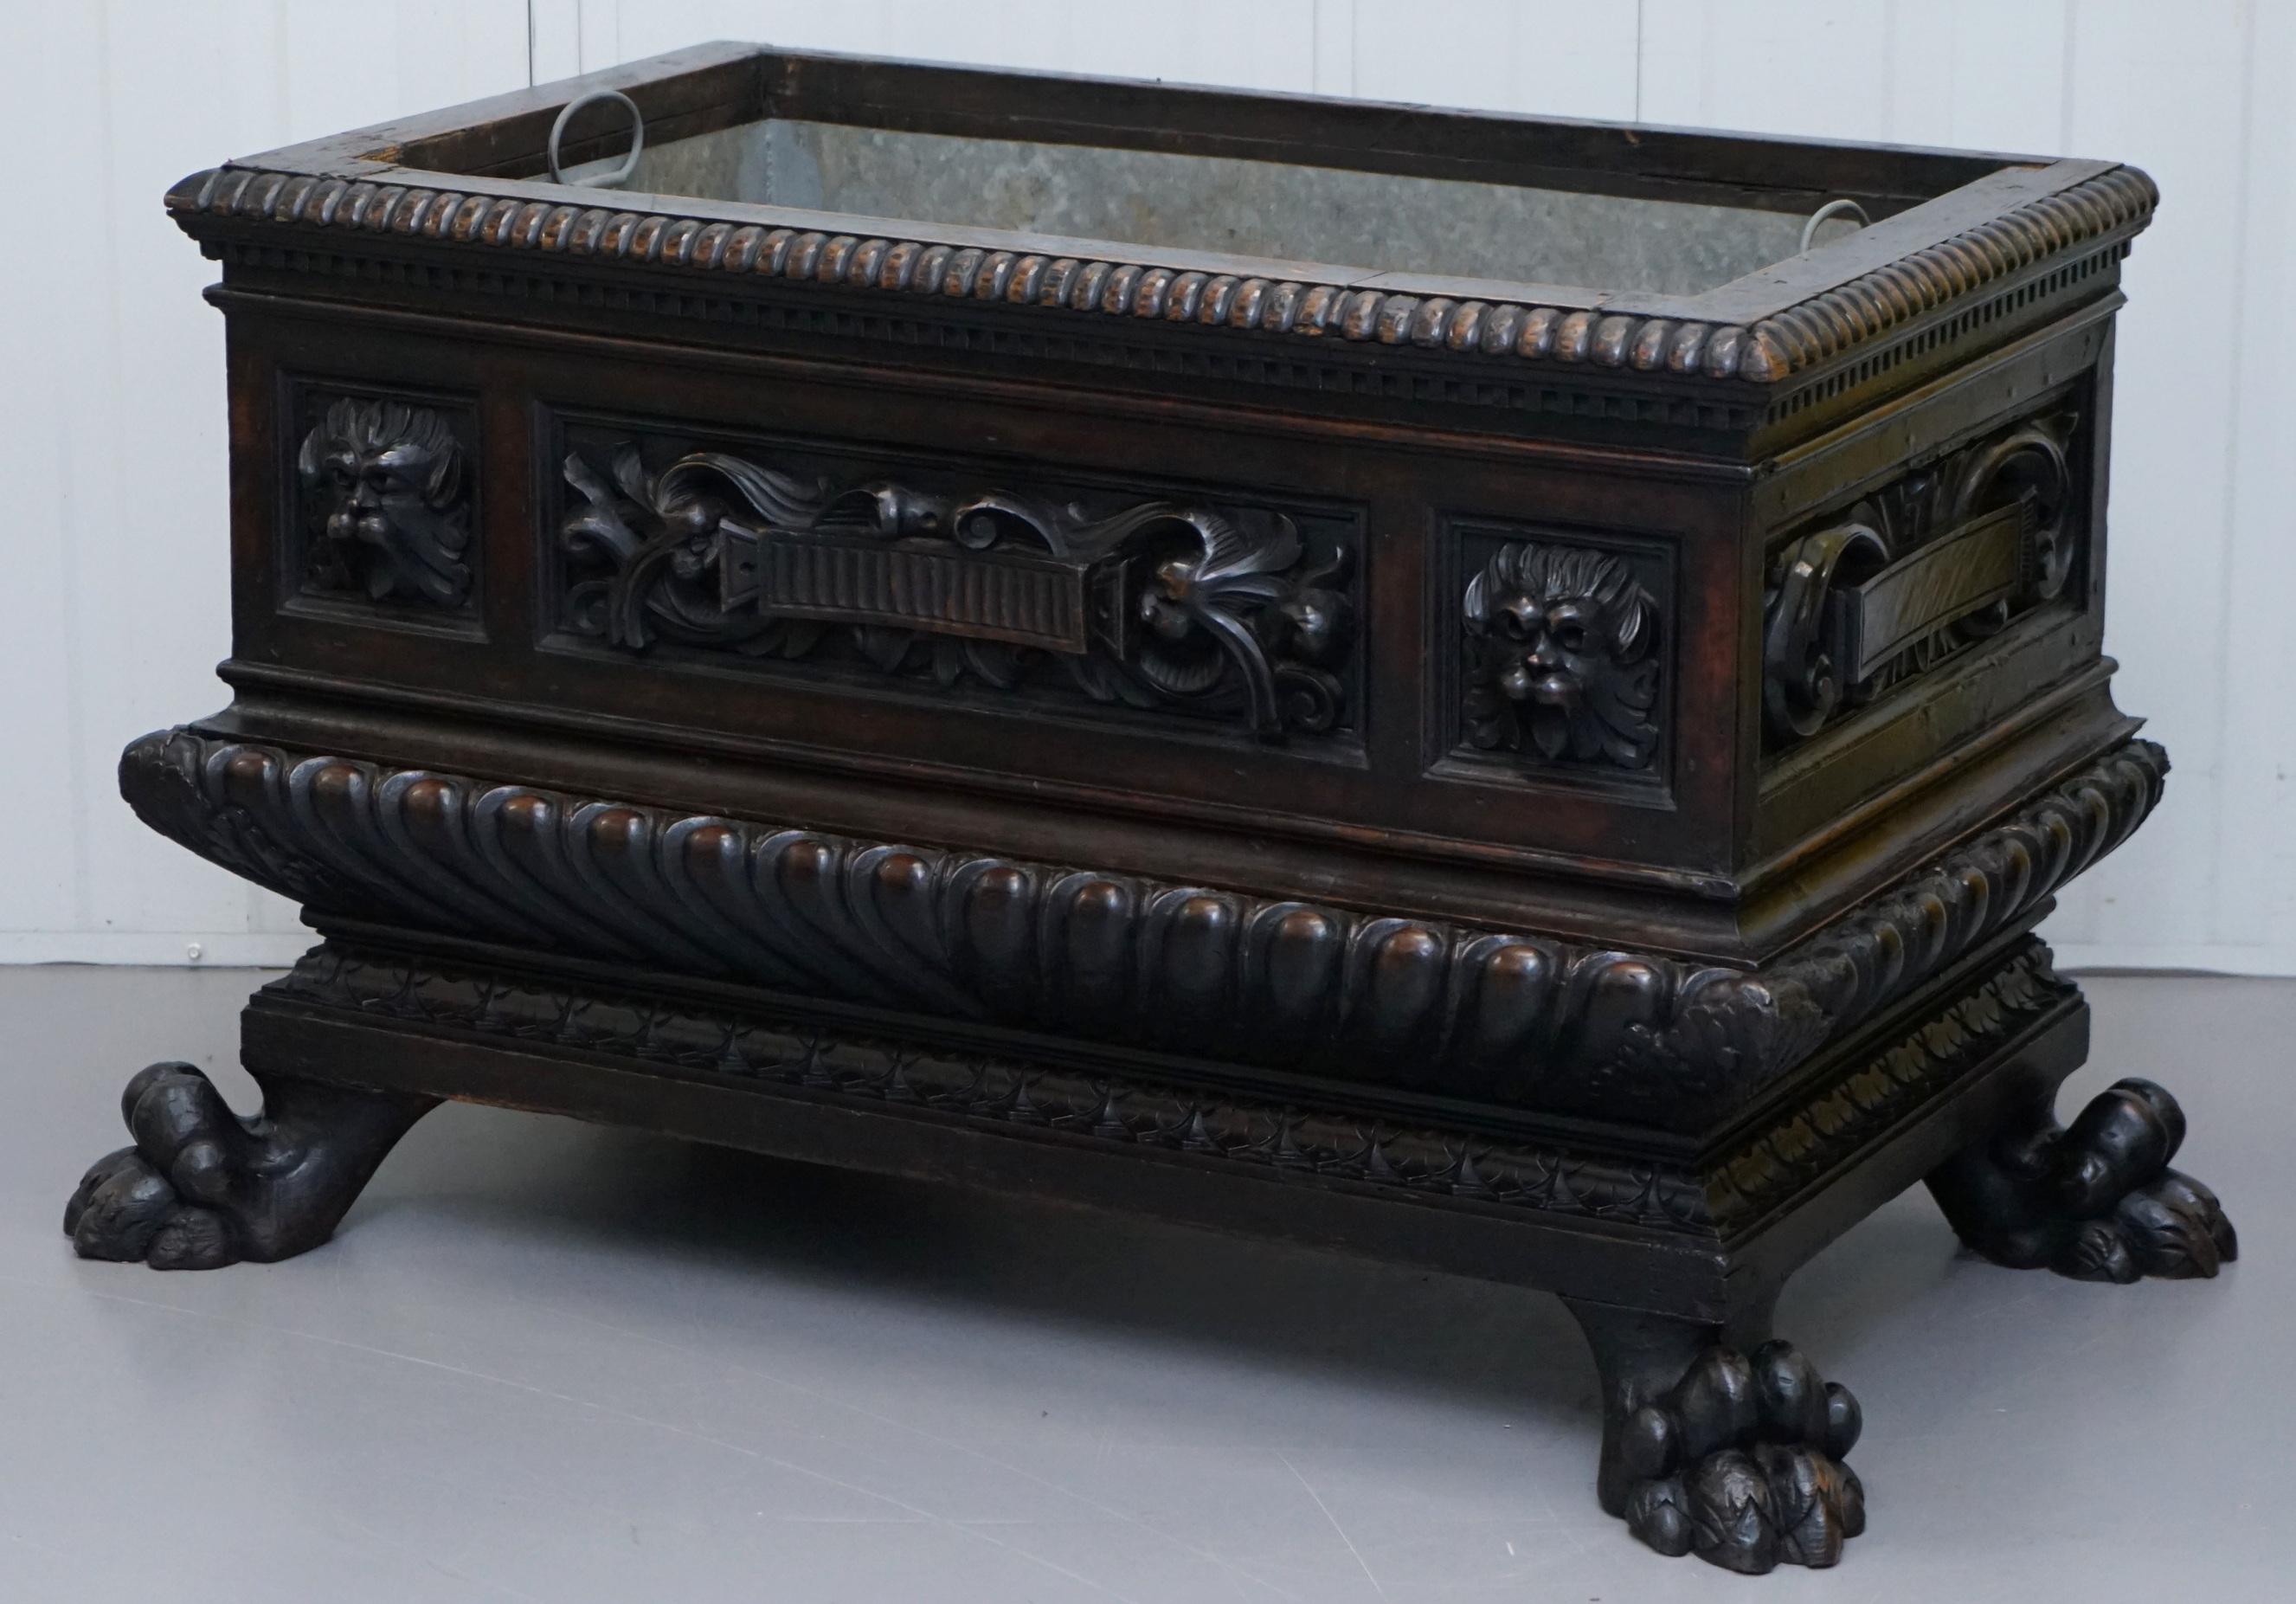 English Gothic Revival 1840 Carved Wood Huge Wine Cooler Planter Lion Hairy Paw Feet For Sale